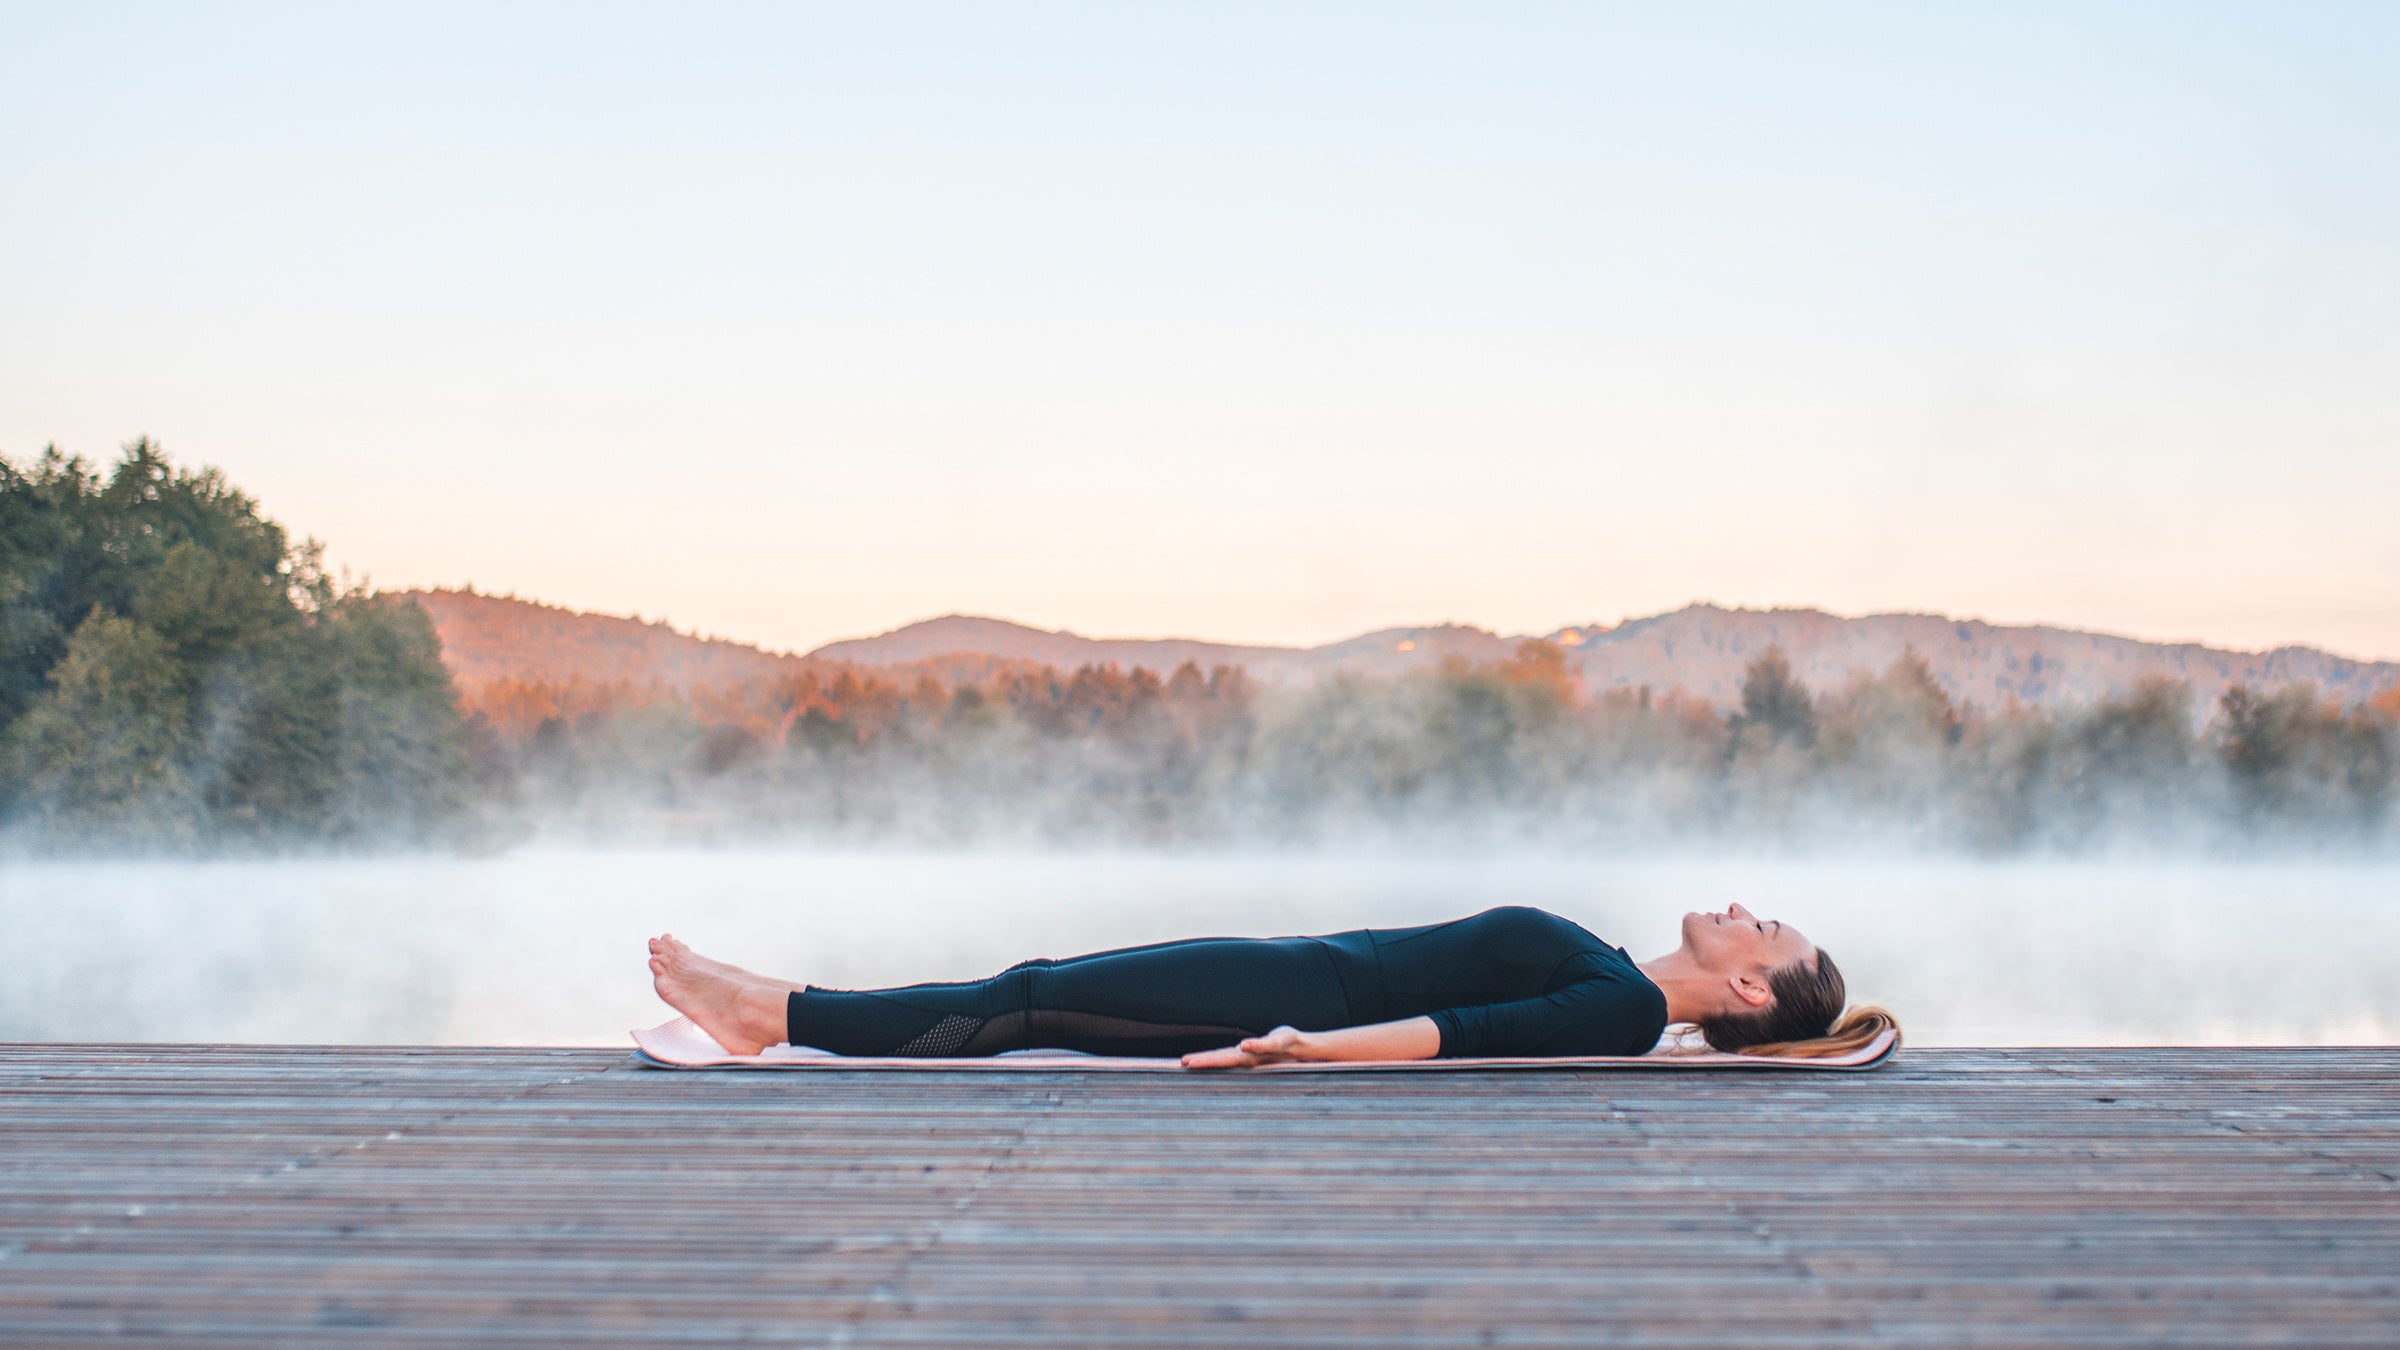 Corpse Pose: How to Properly Rest in Savasana - Yoga Journal